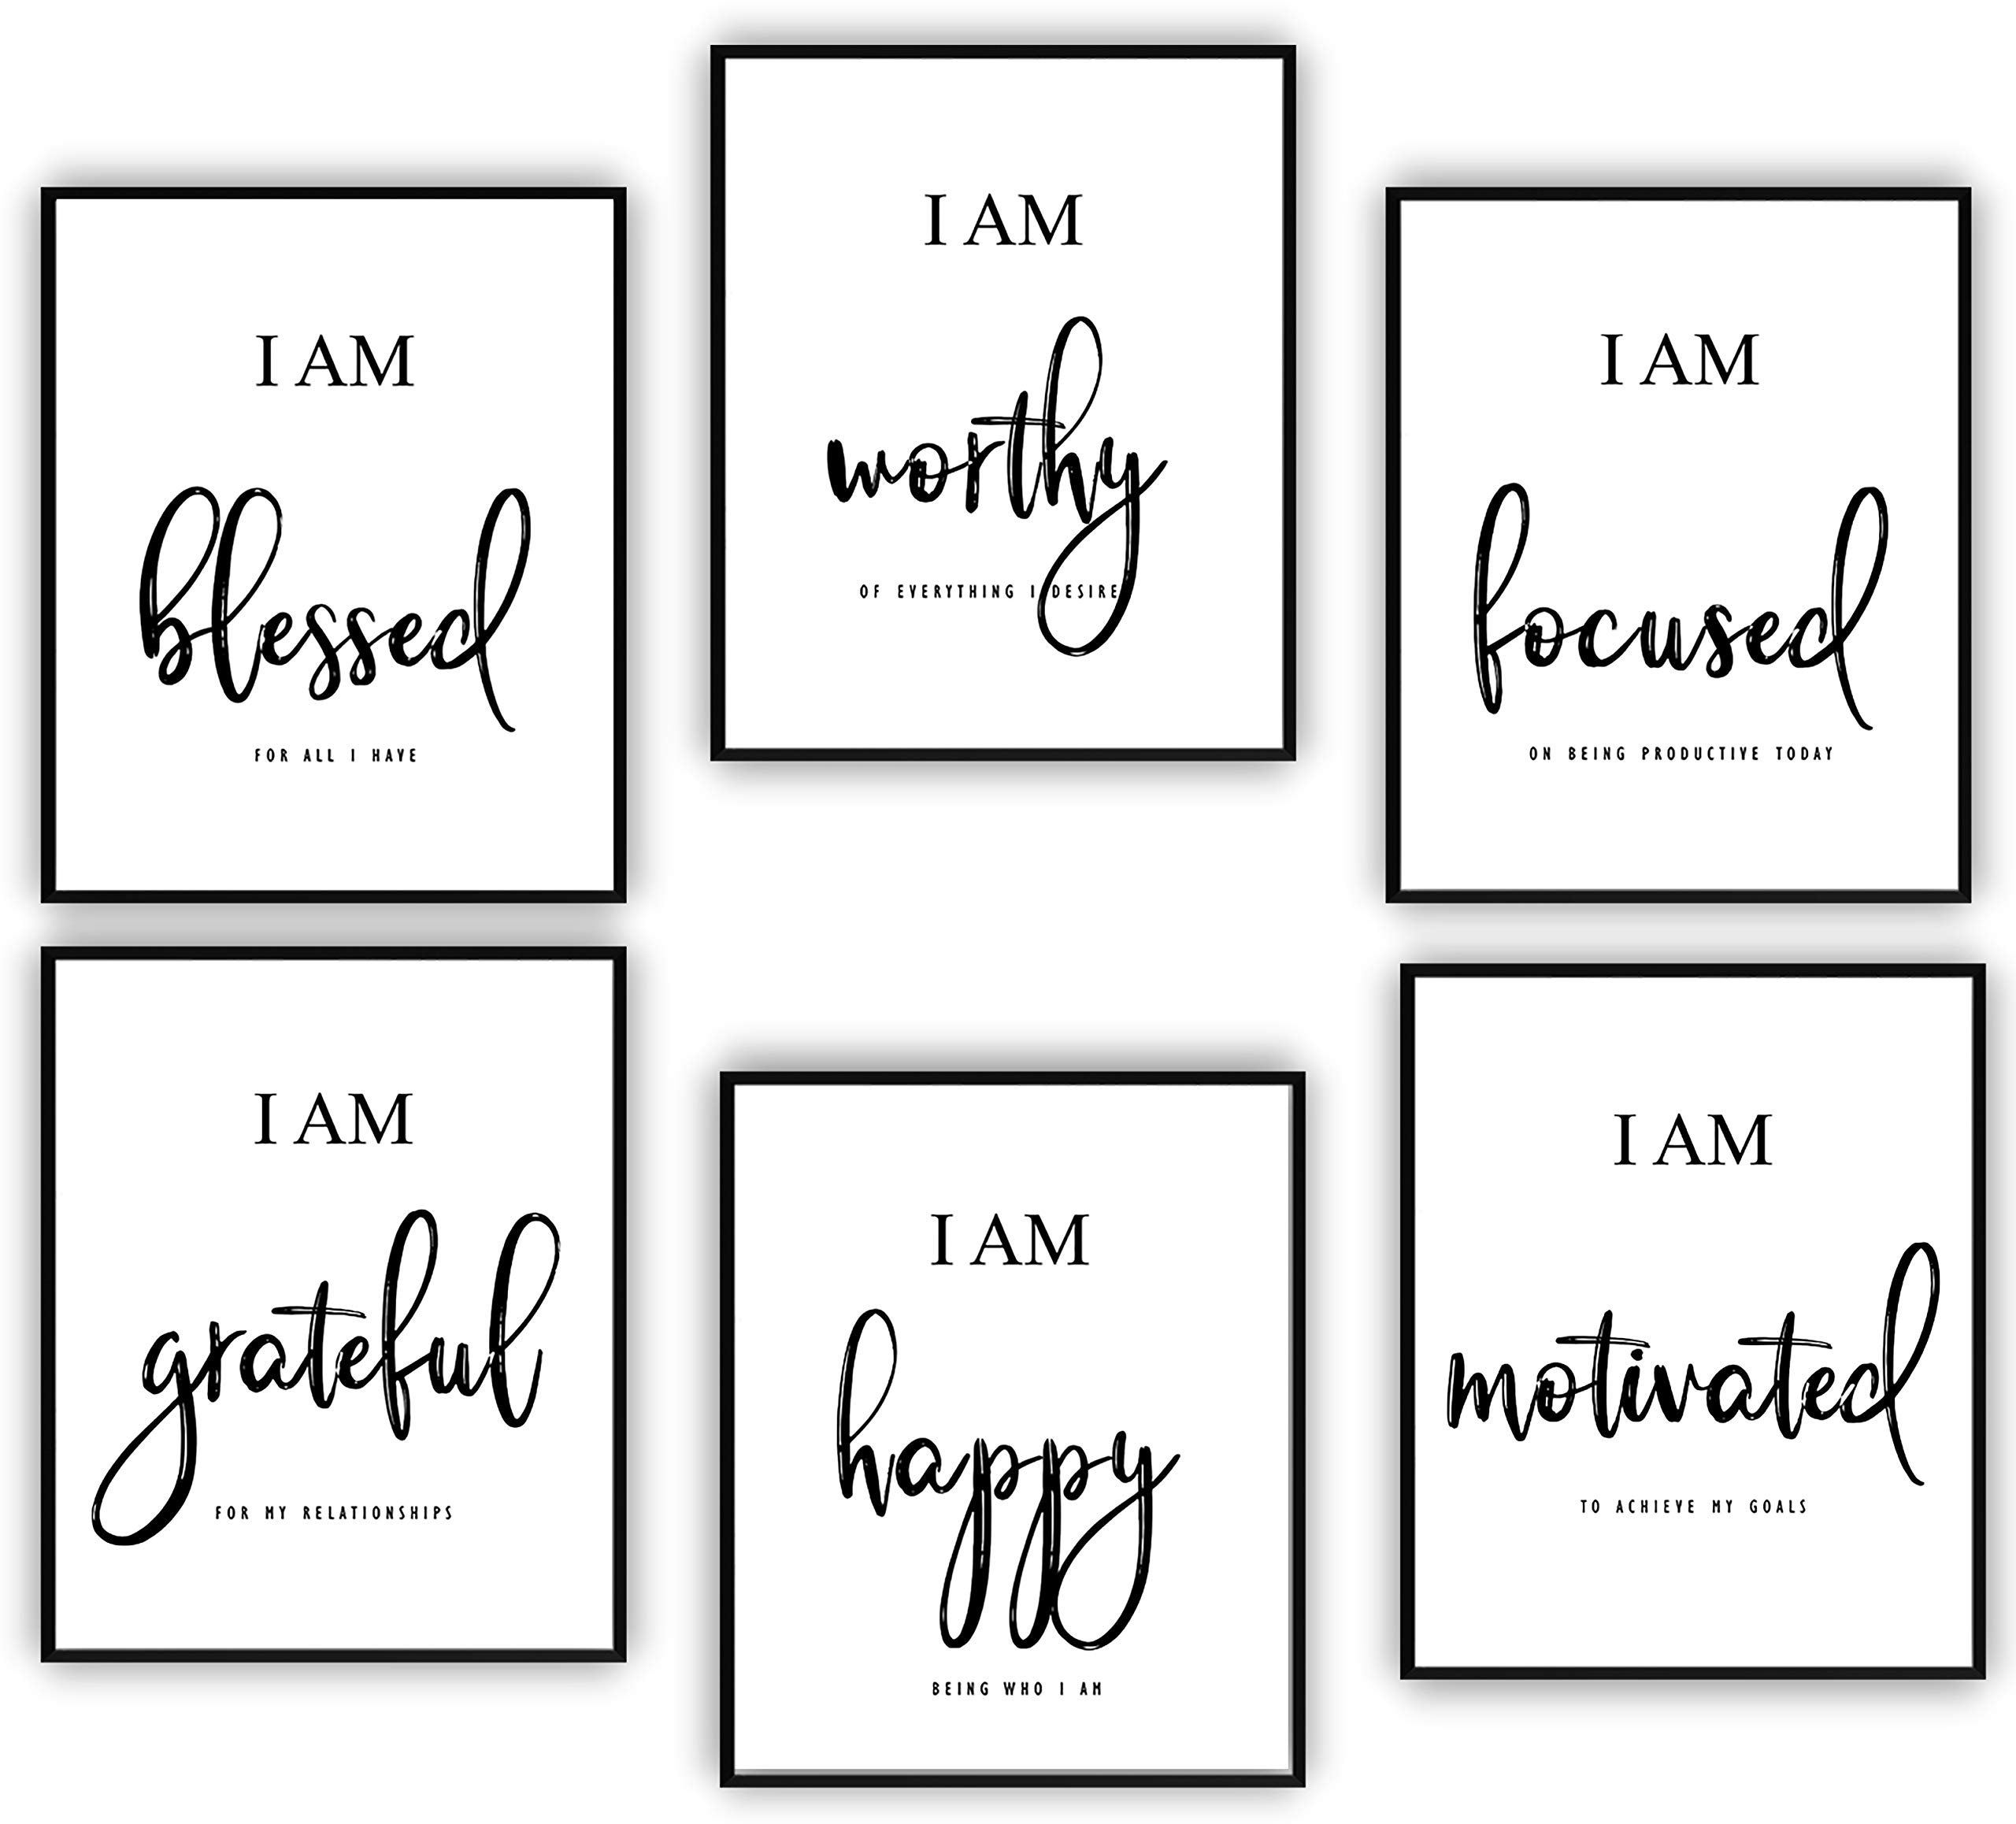 Mua Inspirational Wall Art - Motivational Wall Art - Office & Bedroom Wall Decor - Positive Quotes & Sayings - Daily Affirmations for Men, Women & Kids - Black & White Poster